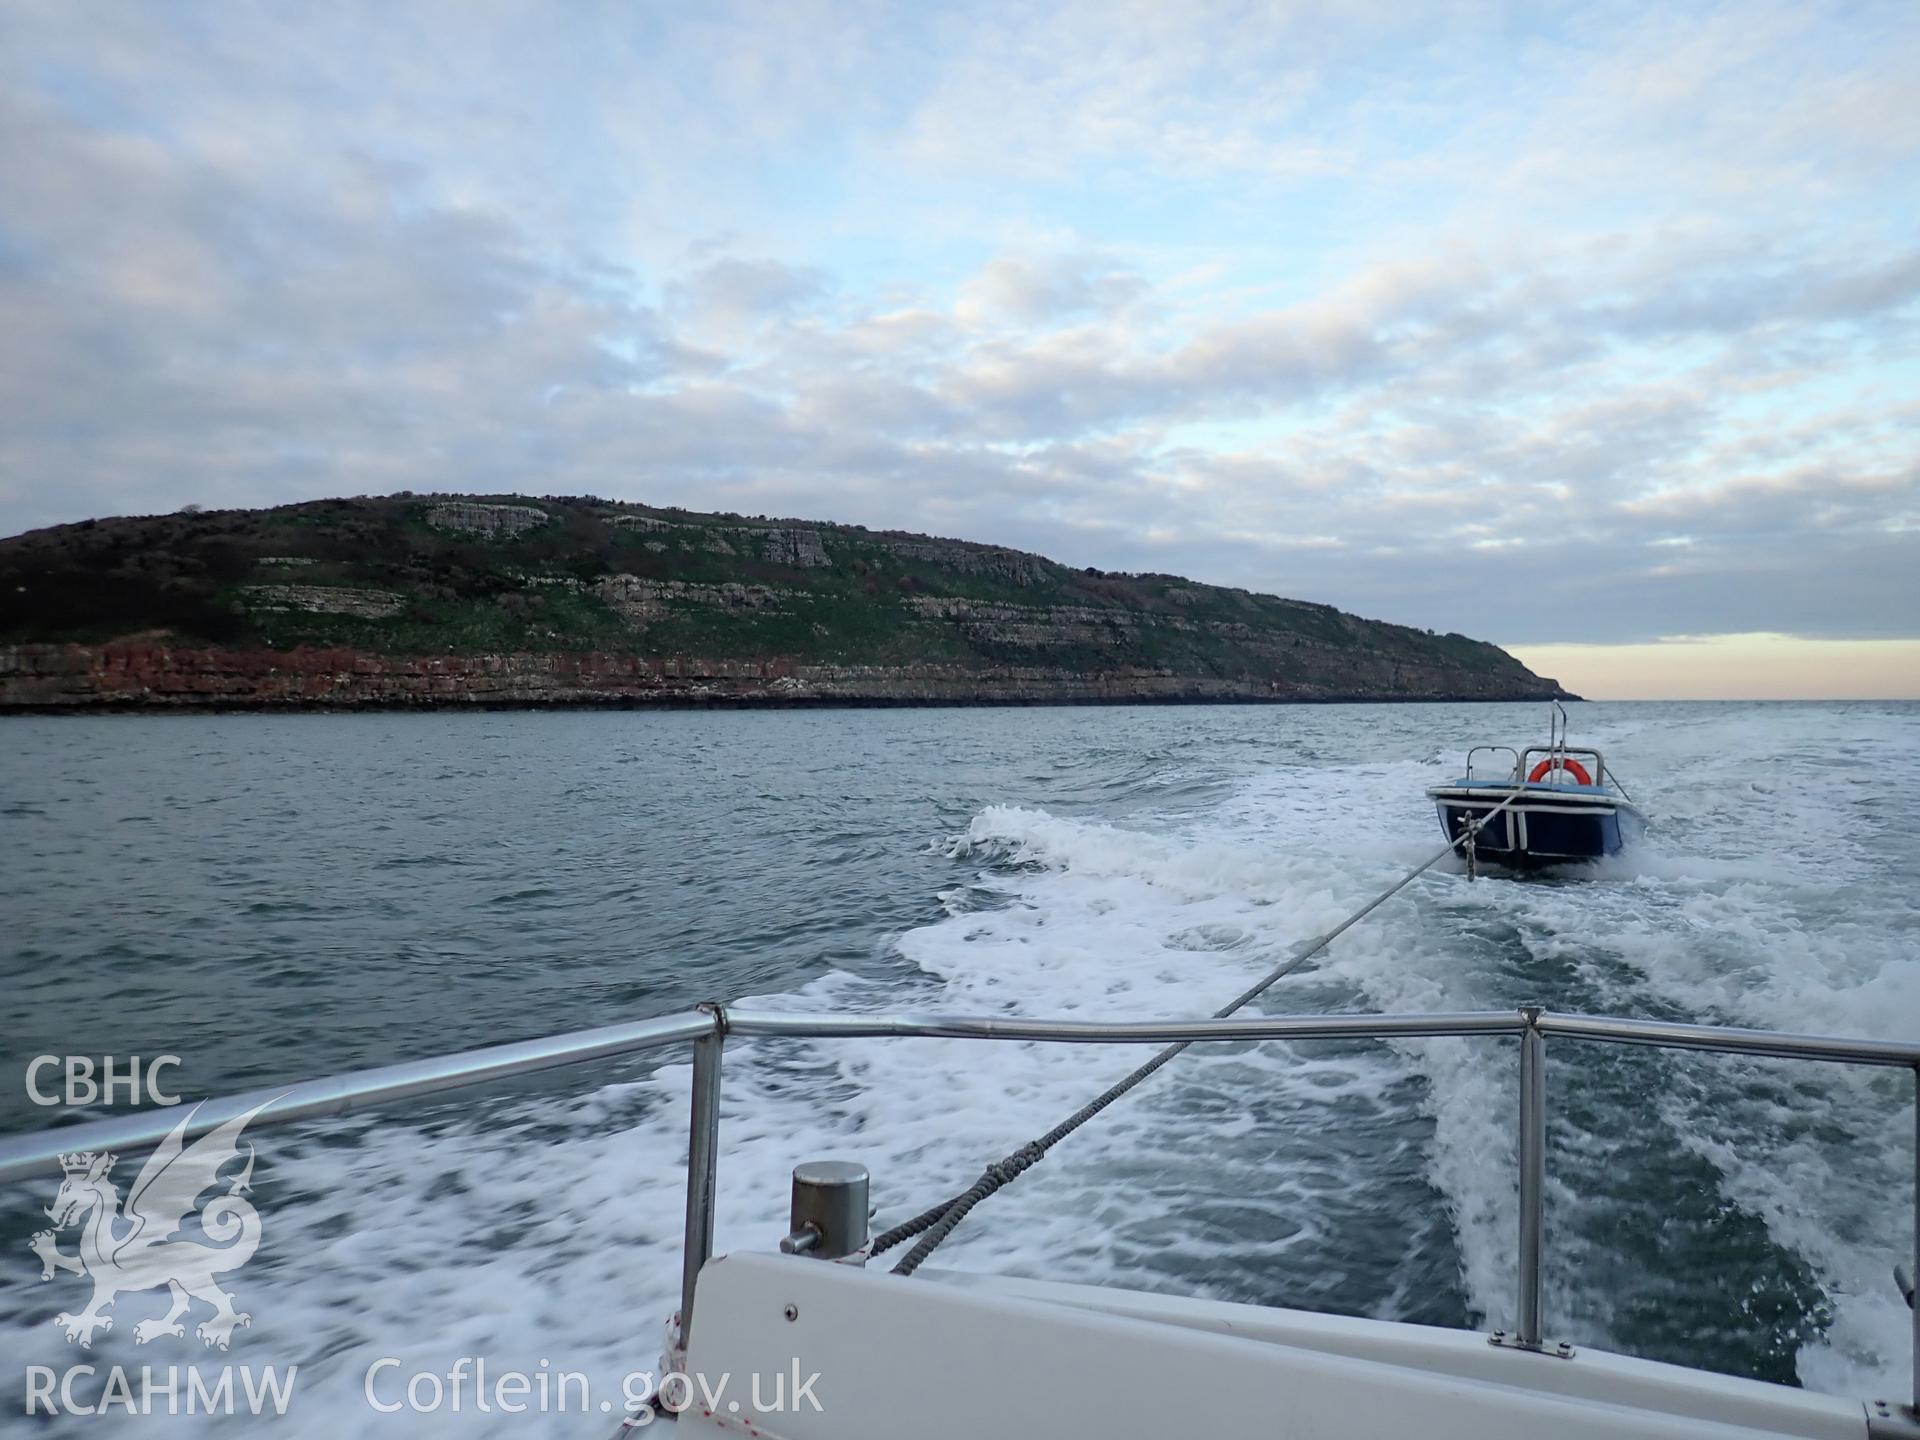 Winter view departing Puffin Island at twilight following CHERISH Project on 26th November 2018. ? Crown: CHERISH PROJECT 2018. Produced with EU funds through the Ireland Wales Co-operation Programme 2014-2020. All material made freely available through the Open Government Licence.